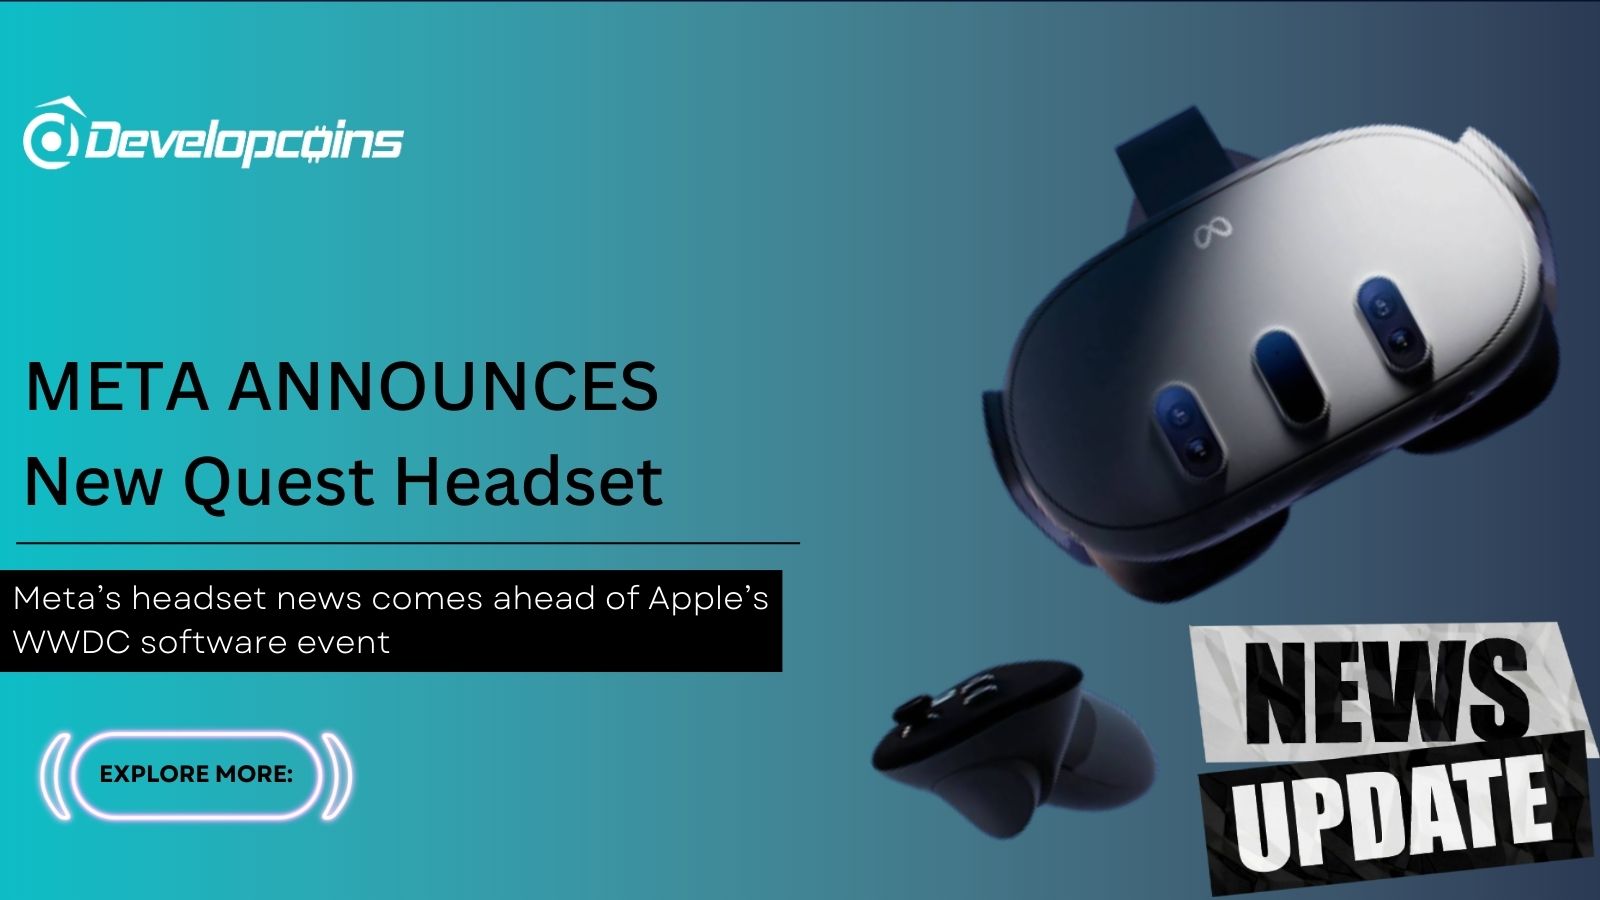 The Launch Of New Quest Headset - The Meta's Ultimate Move